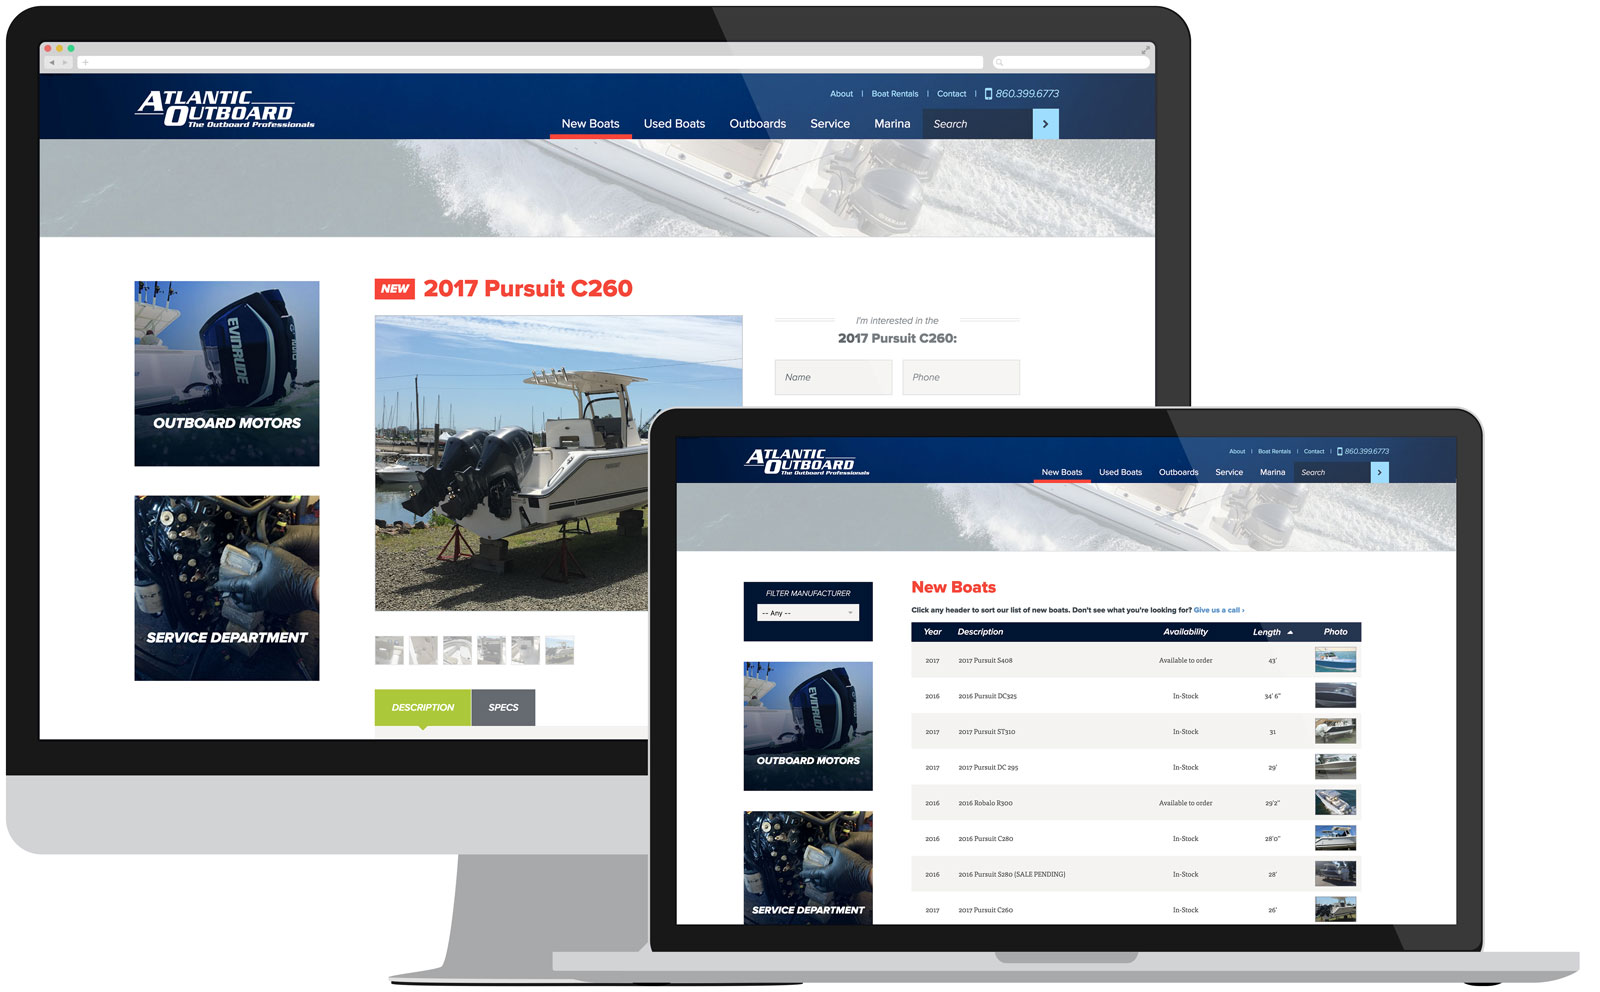 Atlantic Outboard Product Pages